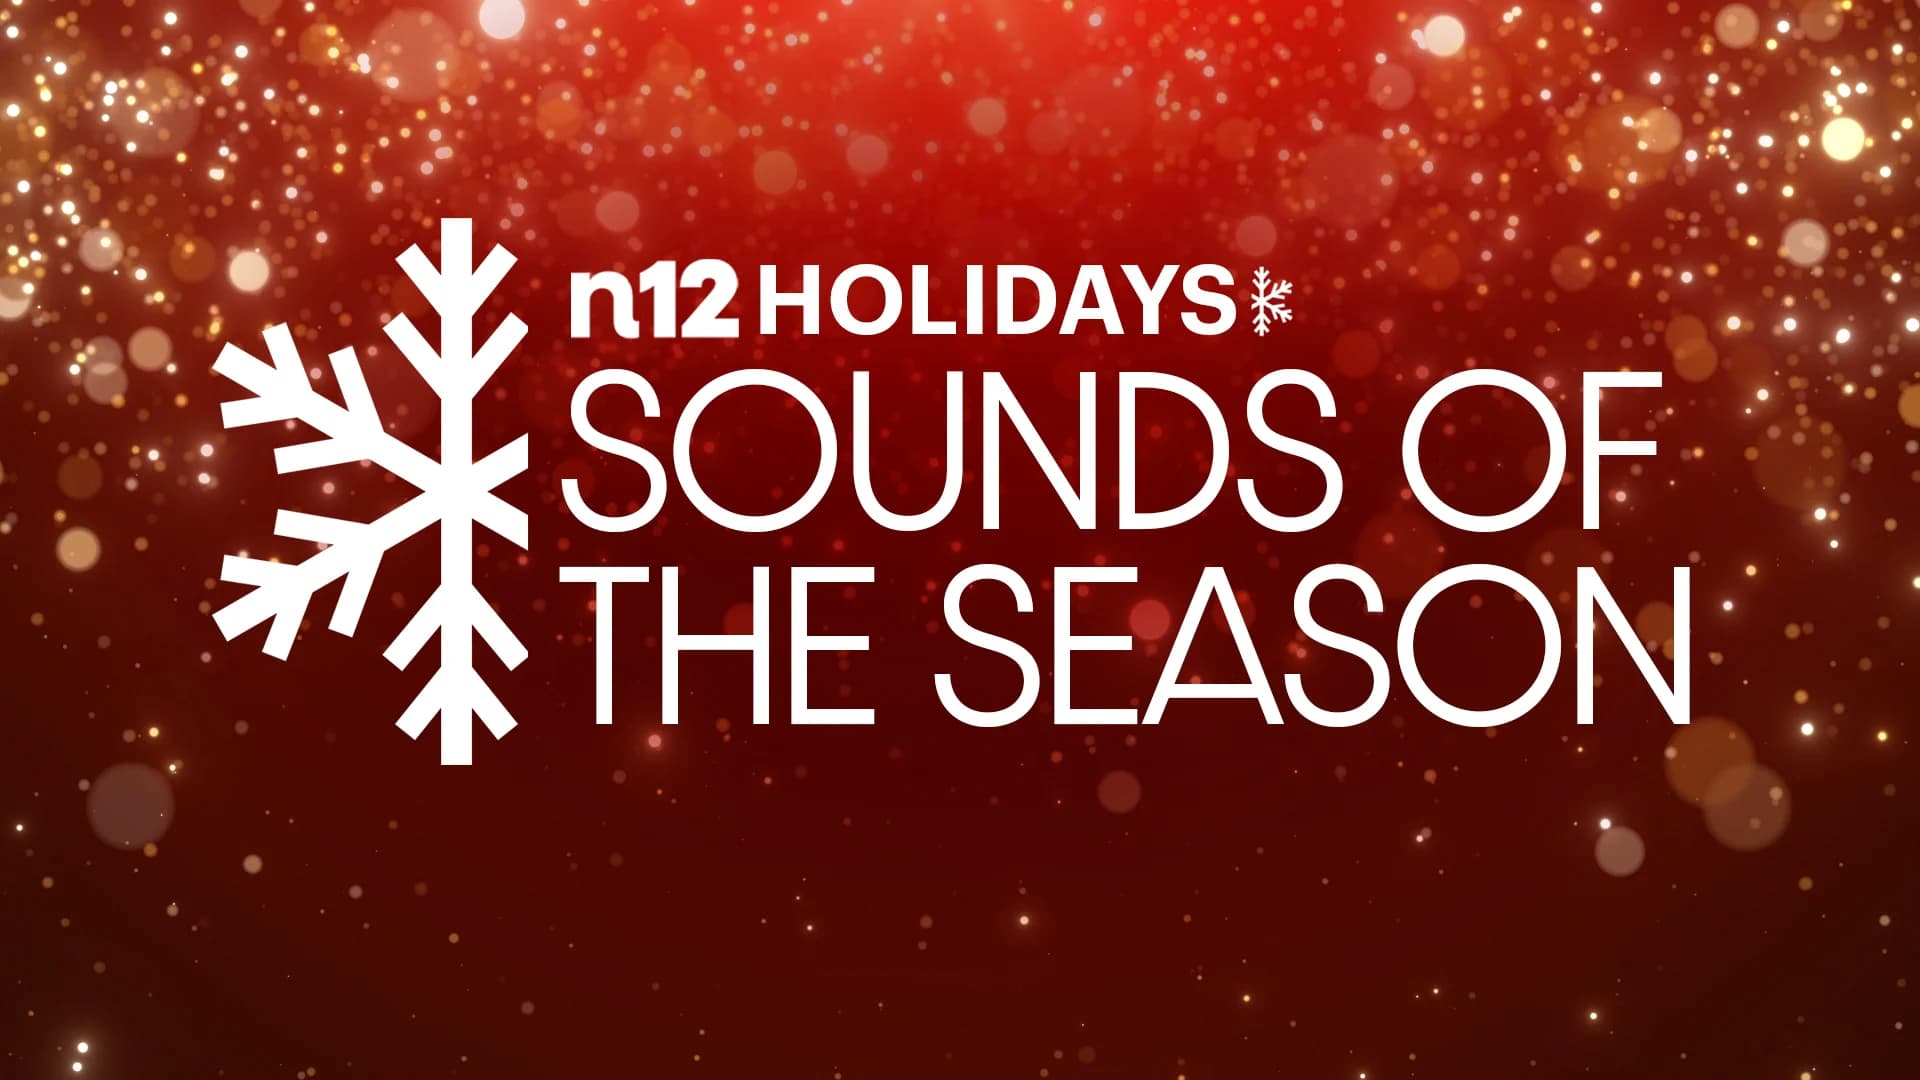 Sounds of the Season winners in New Jersey revealed